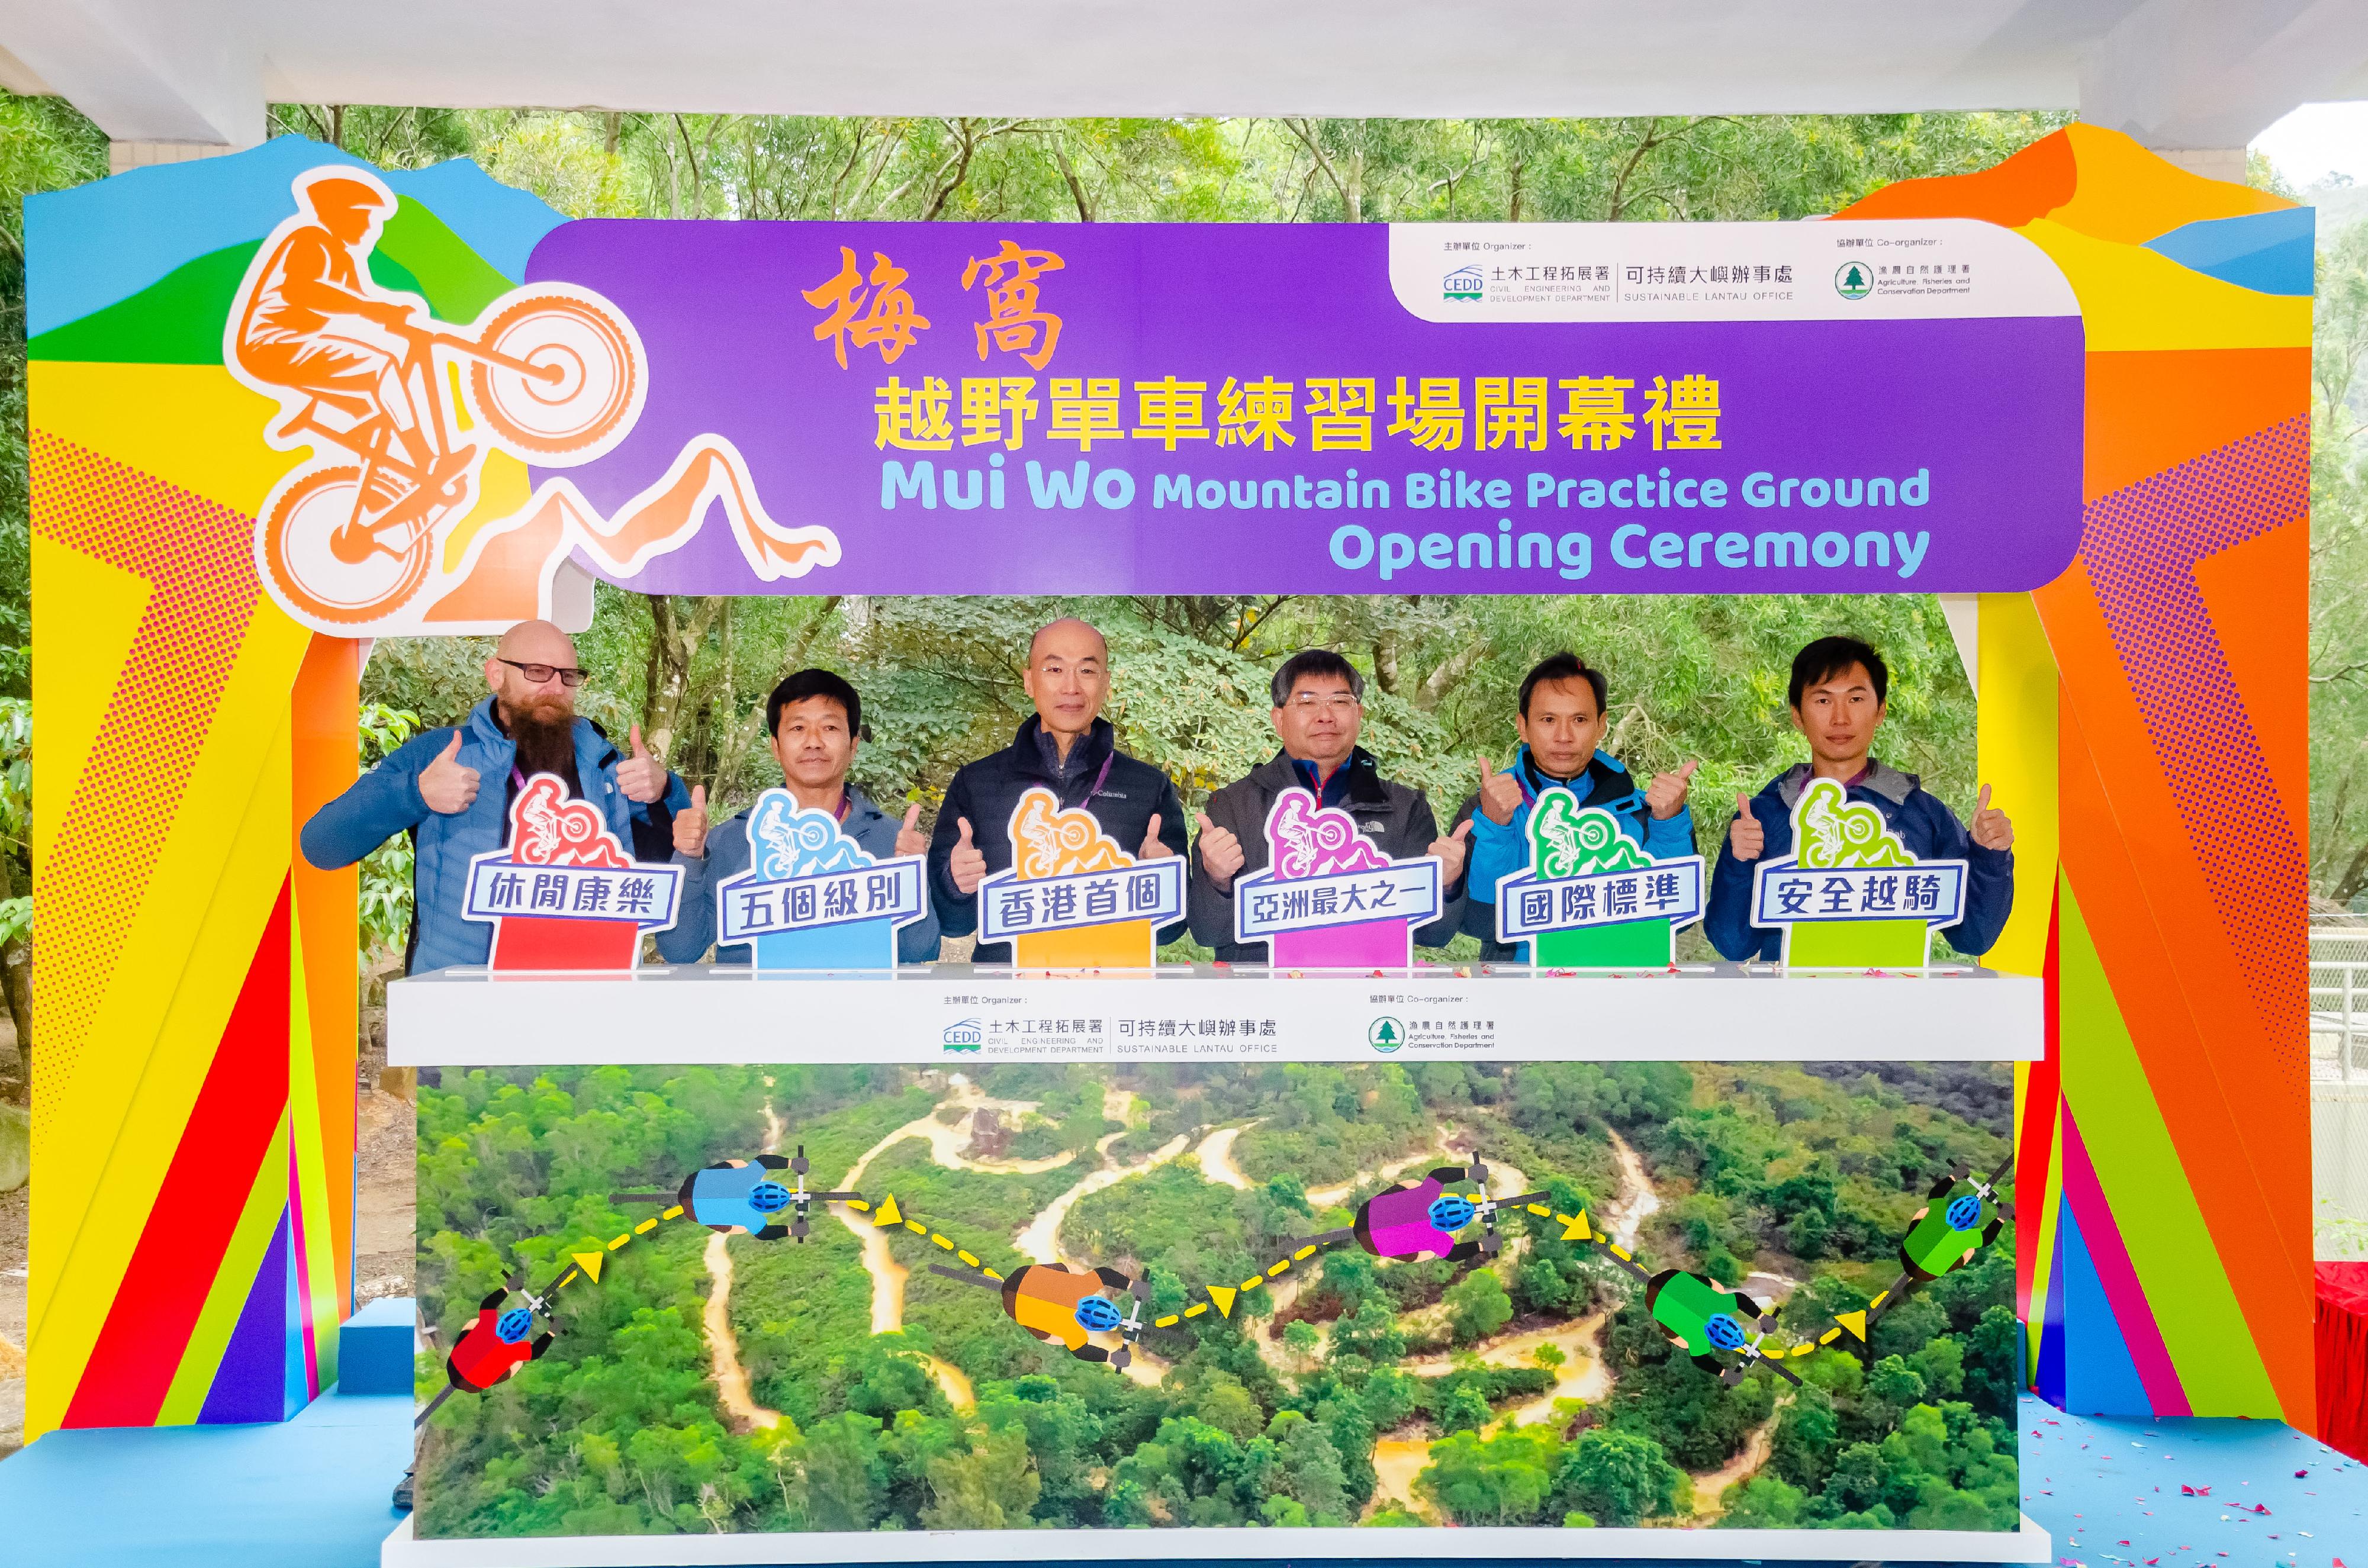 The Civil Engineering and Development Department and the Agriculture, Fisheries and Conservation Department held the Mui Wo Mountain Bike Practice Ground Opening Ceremony today (December 17). Photo shows the Director of Civil Engineering and Development, Mr Michael Fong (third left); the Director of Agriculture, Fisheries and Conservation, Dr Leung Siu-fai (third right); and other officiating guests officiating at the ceremony.